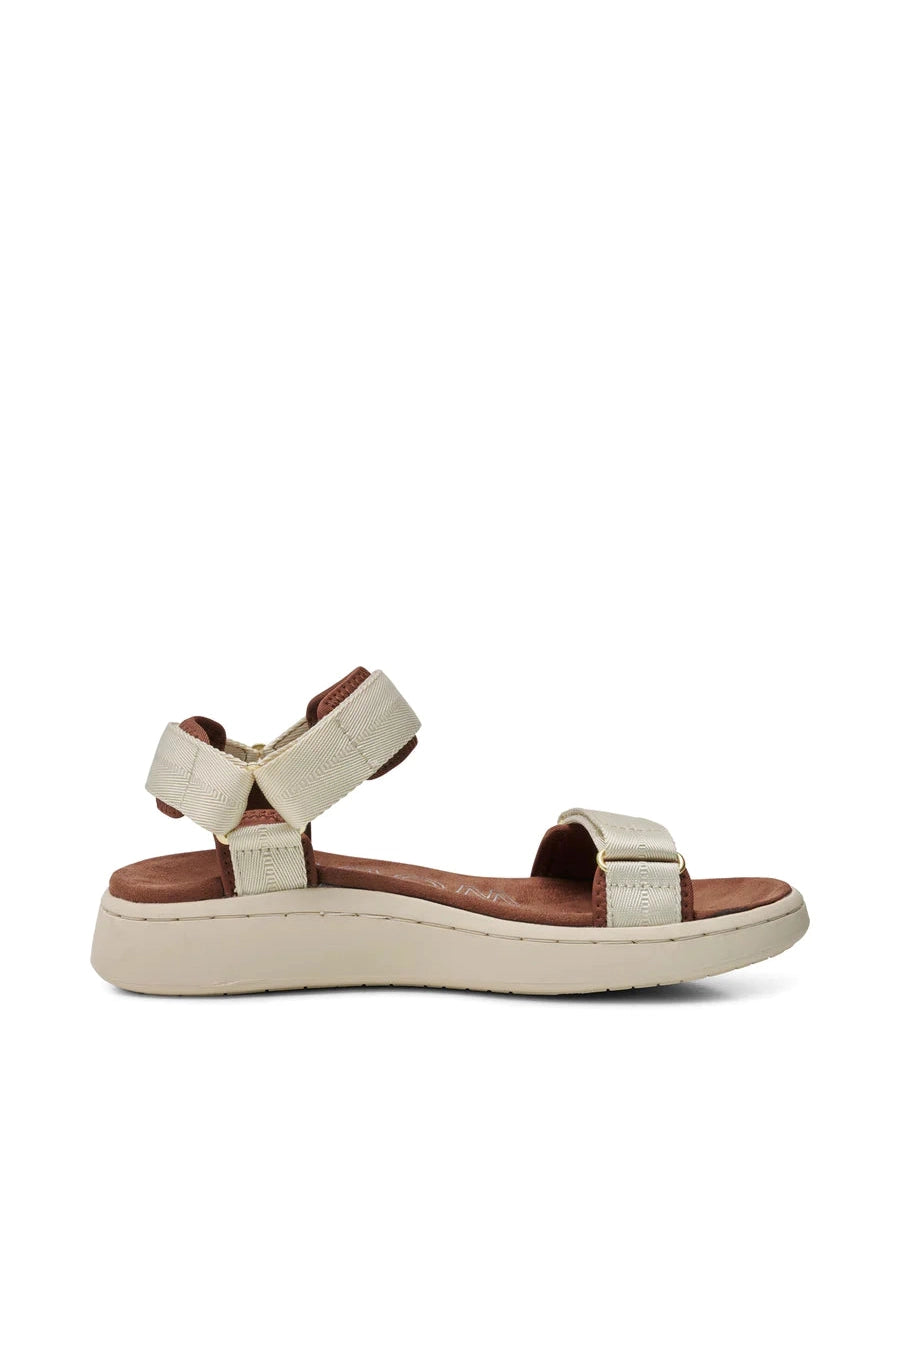 Woden Ivory Sandals-Accessories-Ohh! By Gum - Shop Sustainable